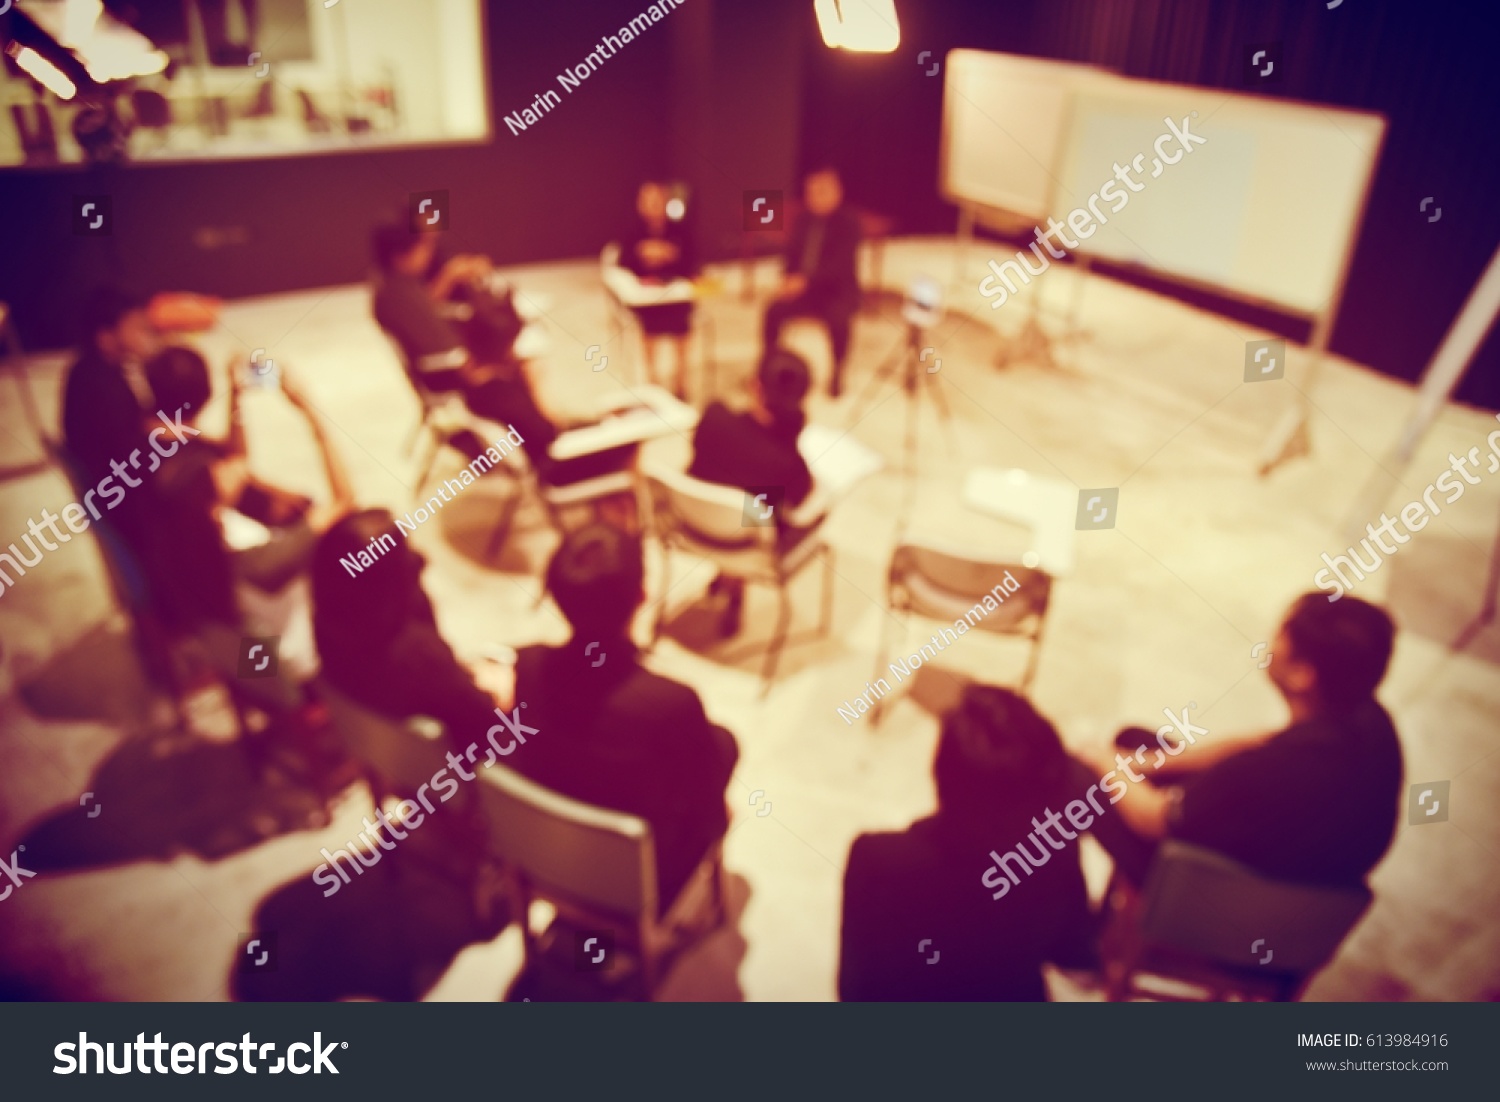 blurred image of group Business team People in black shirt Colleagues Teamwork sitting and stand, Meeting for planning project business in studio  Concept. vintage filter. #613984916